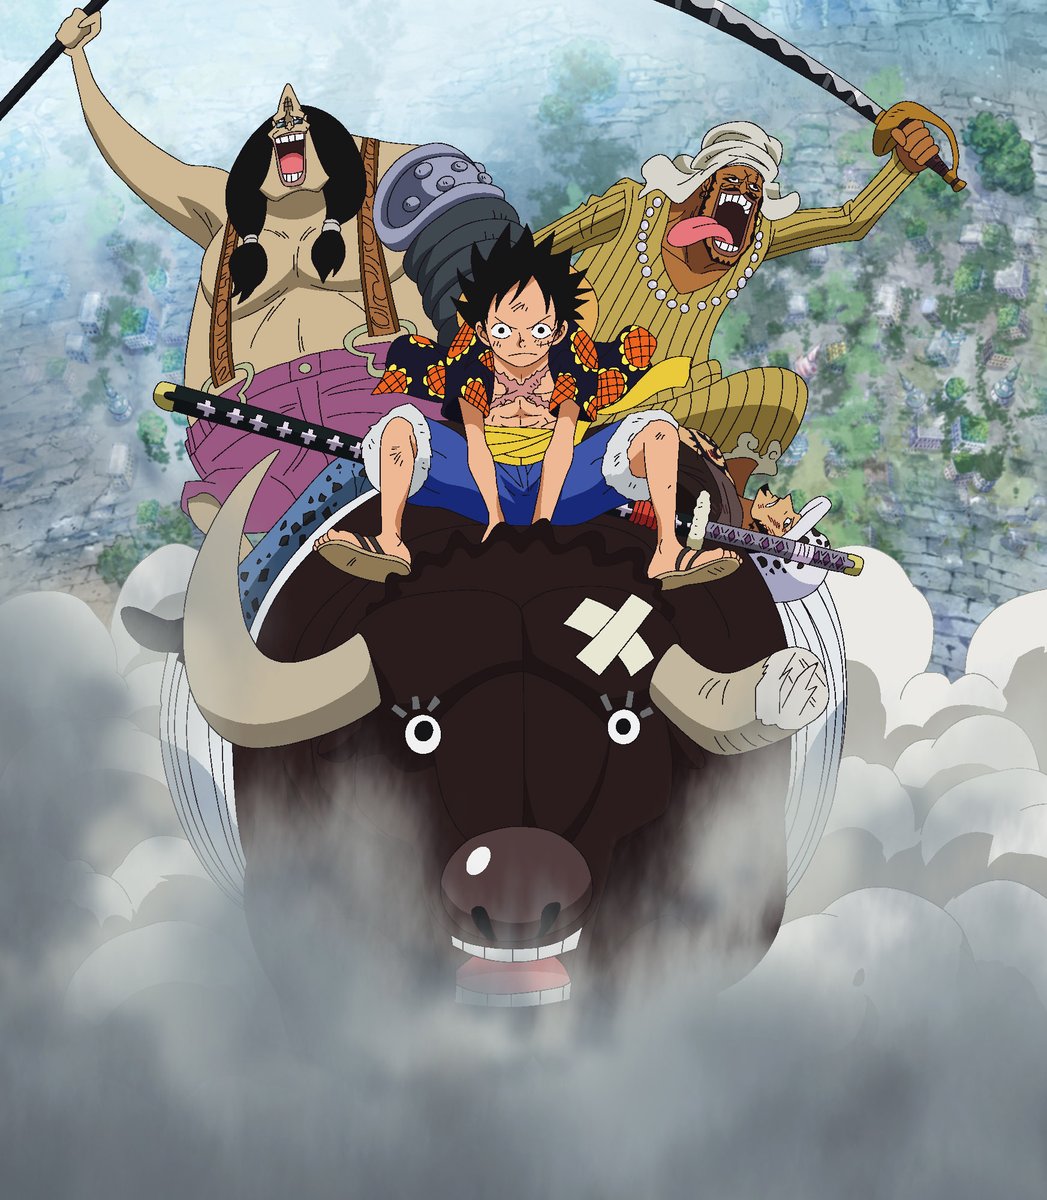 Toei Animation The Straw Hats Adventure In Dressrosa Heats Up New Dub Episodes Of One Piece Season 11 Voyage 5 Have Started Its Rollout On Digital Download Microsoft